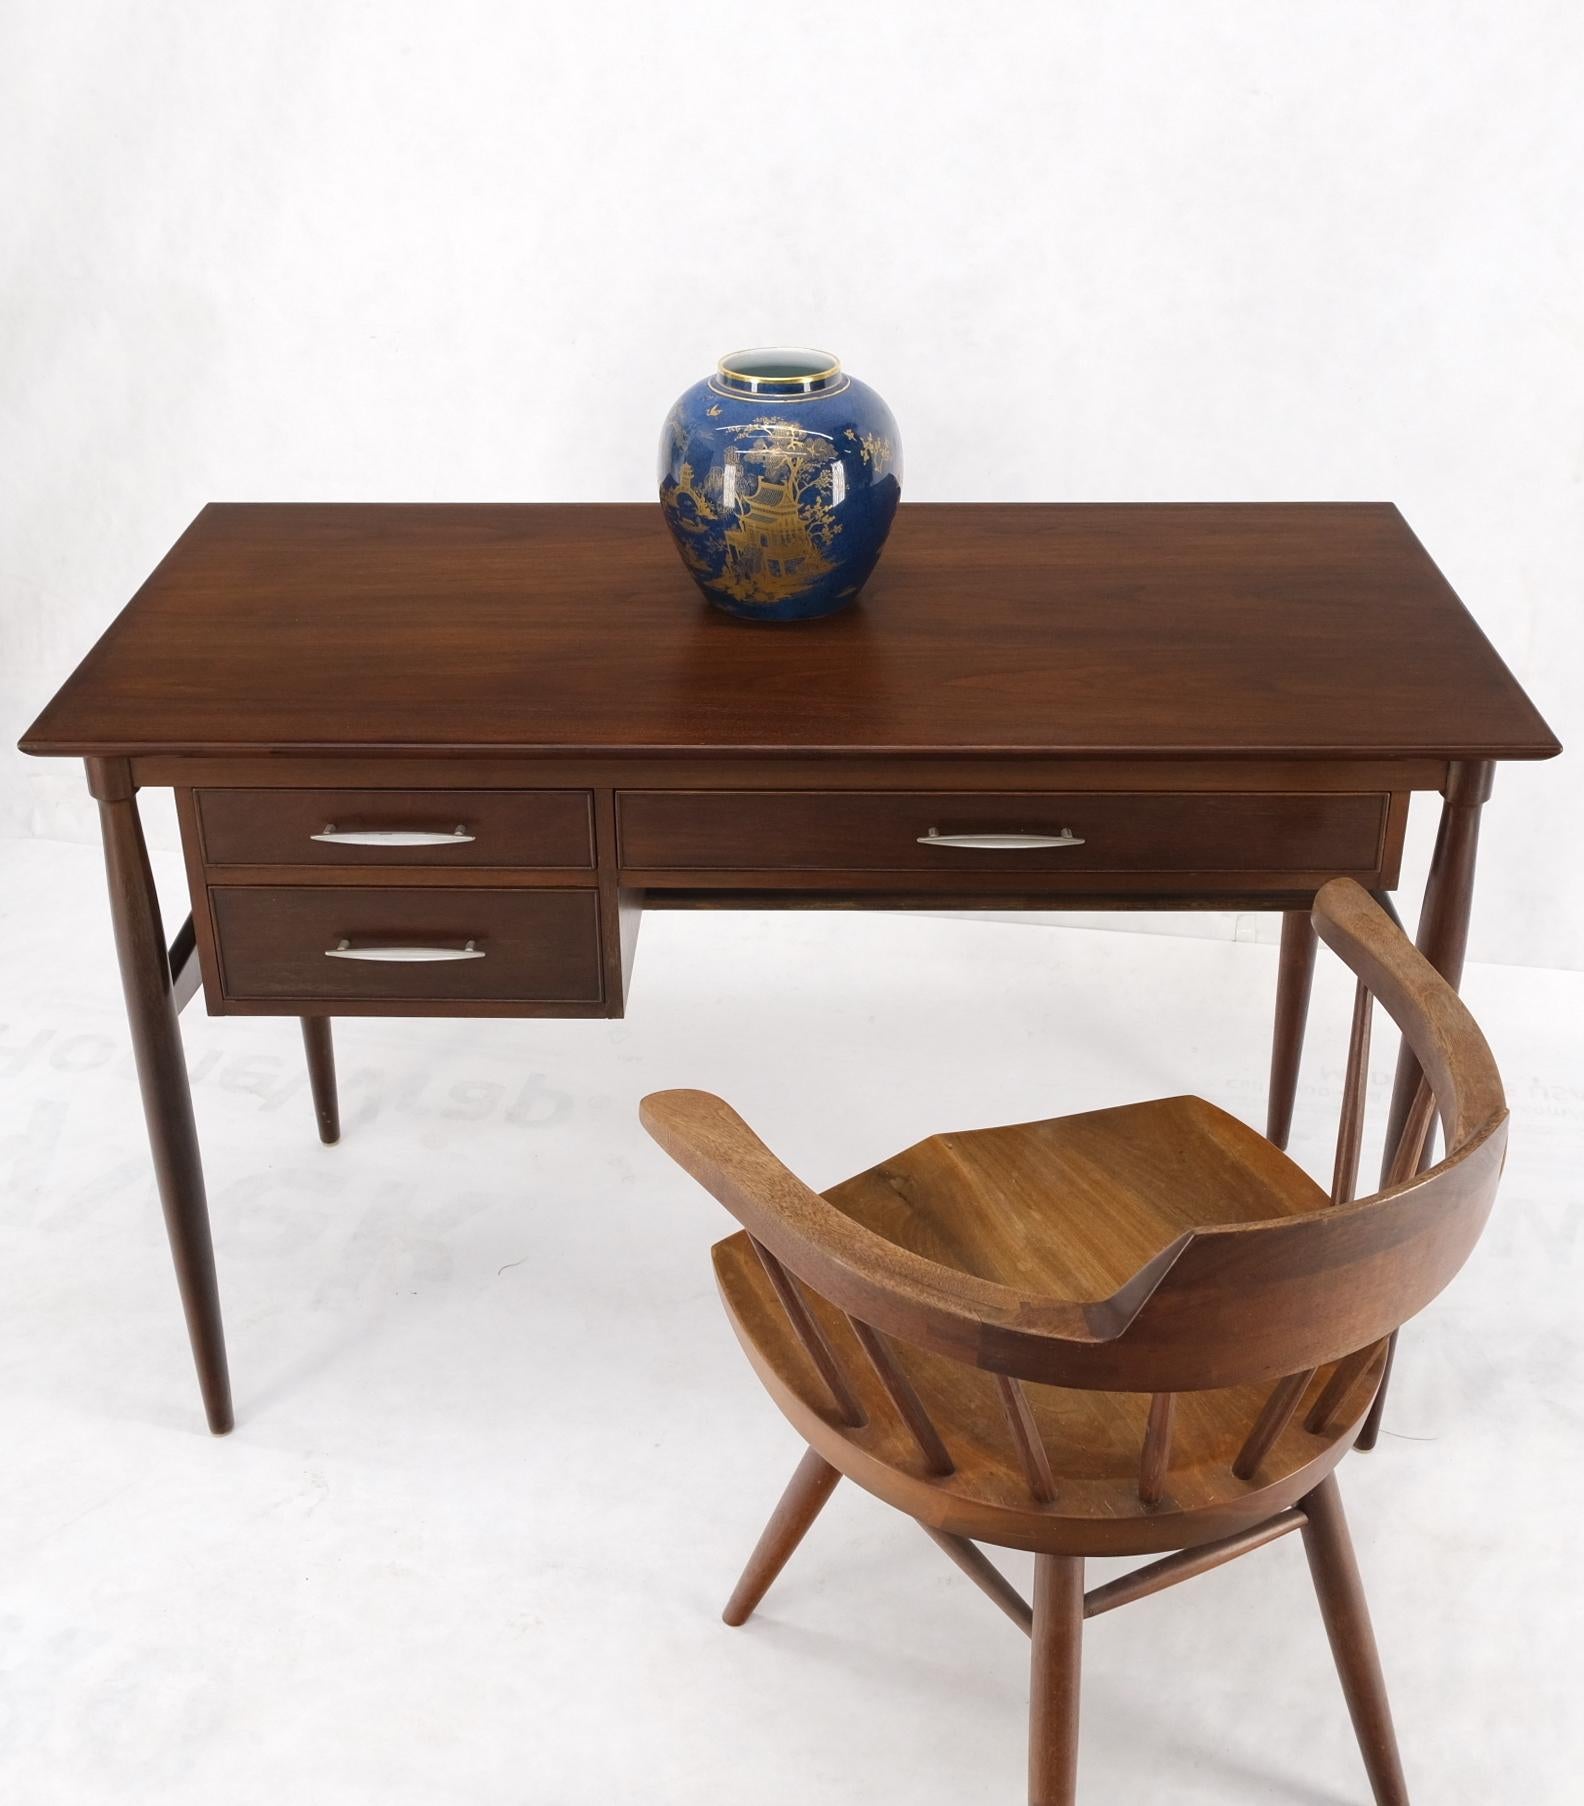 Exposed Dowel Shape Legs Floating Top 3 Drawers Walnut Desk Table Console Mint 4